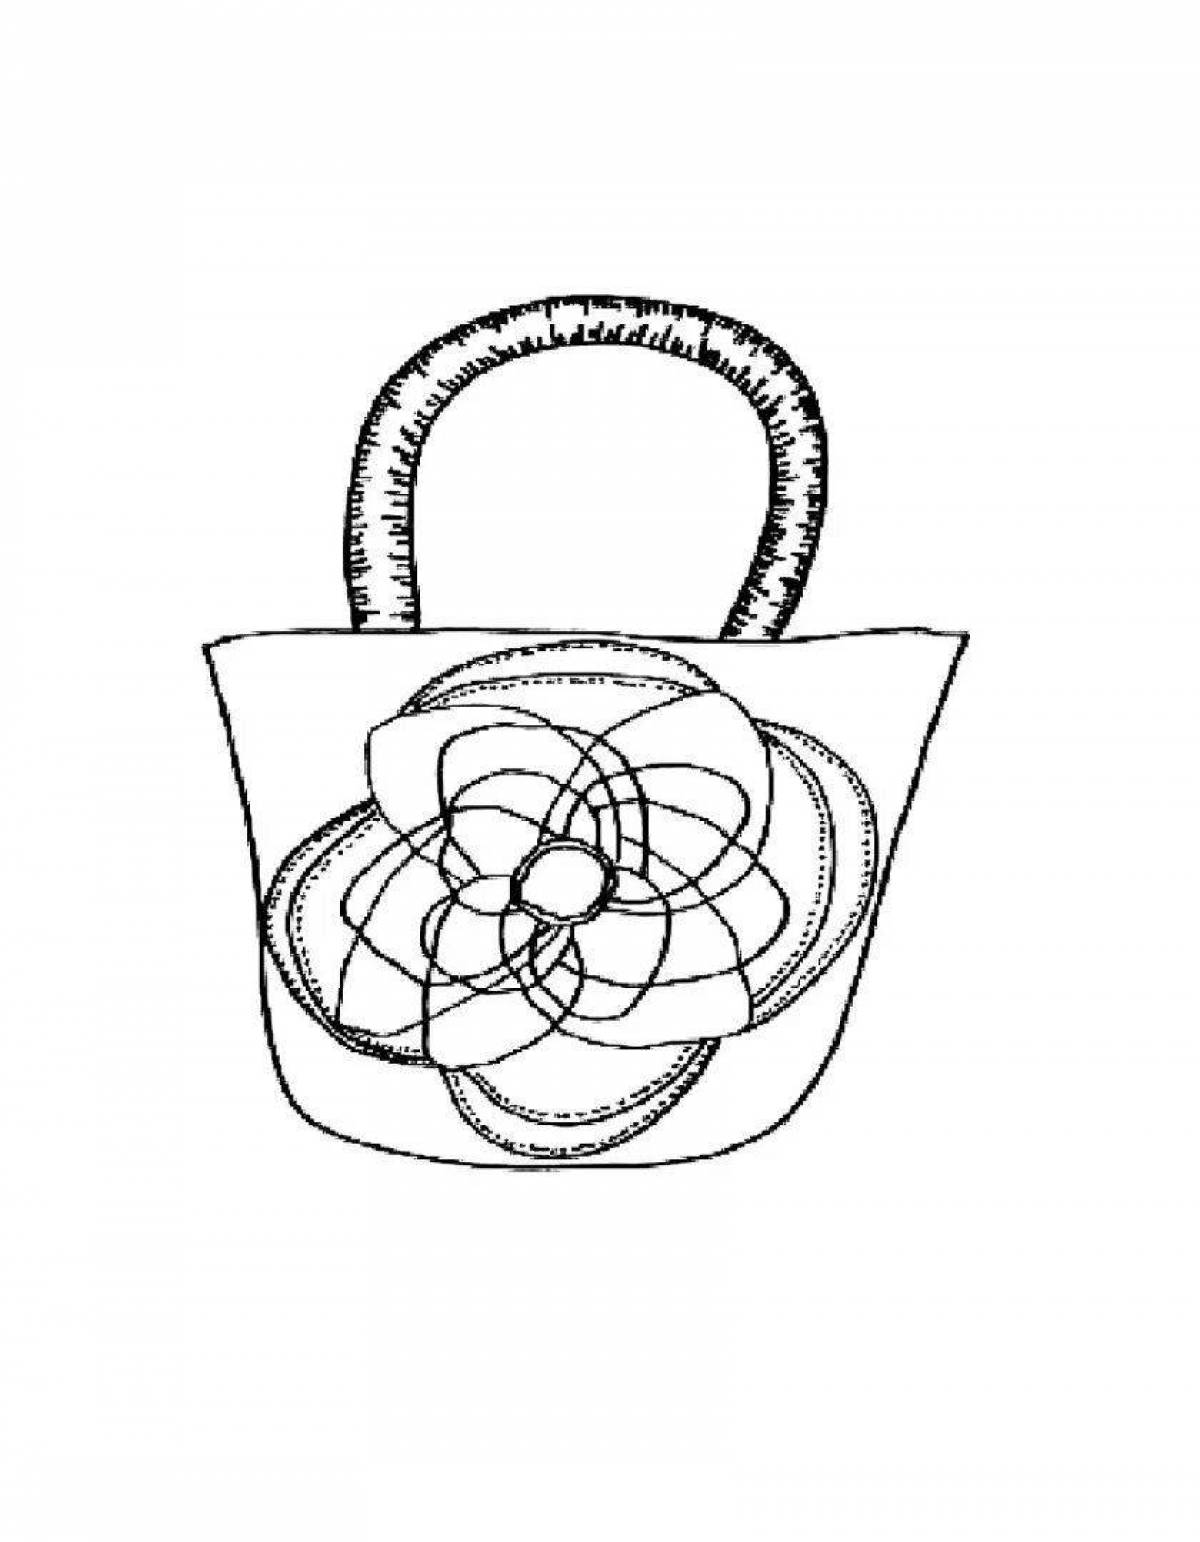 Coloring page amazing accessories for girls